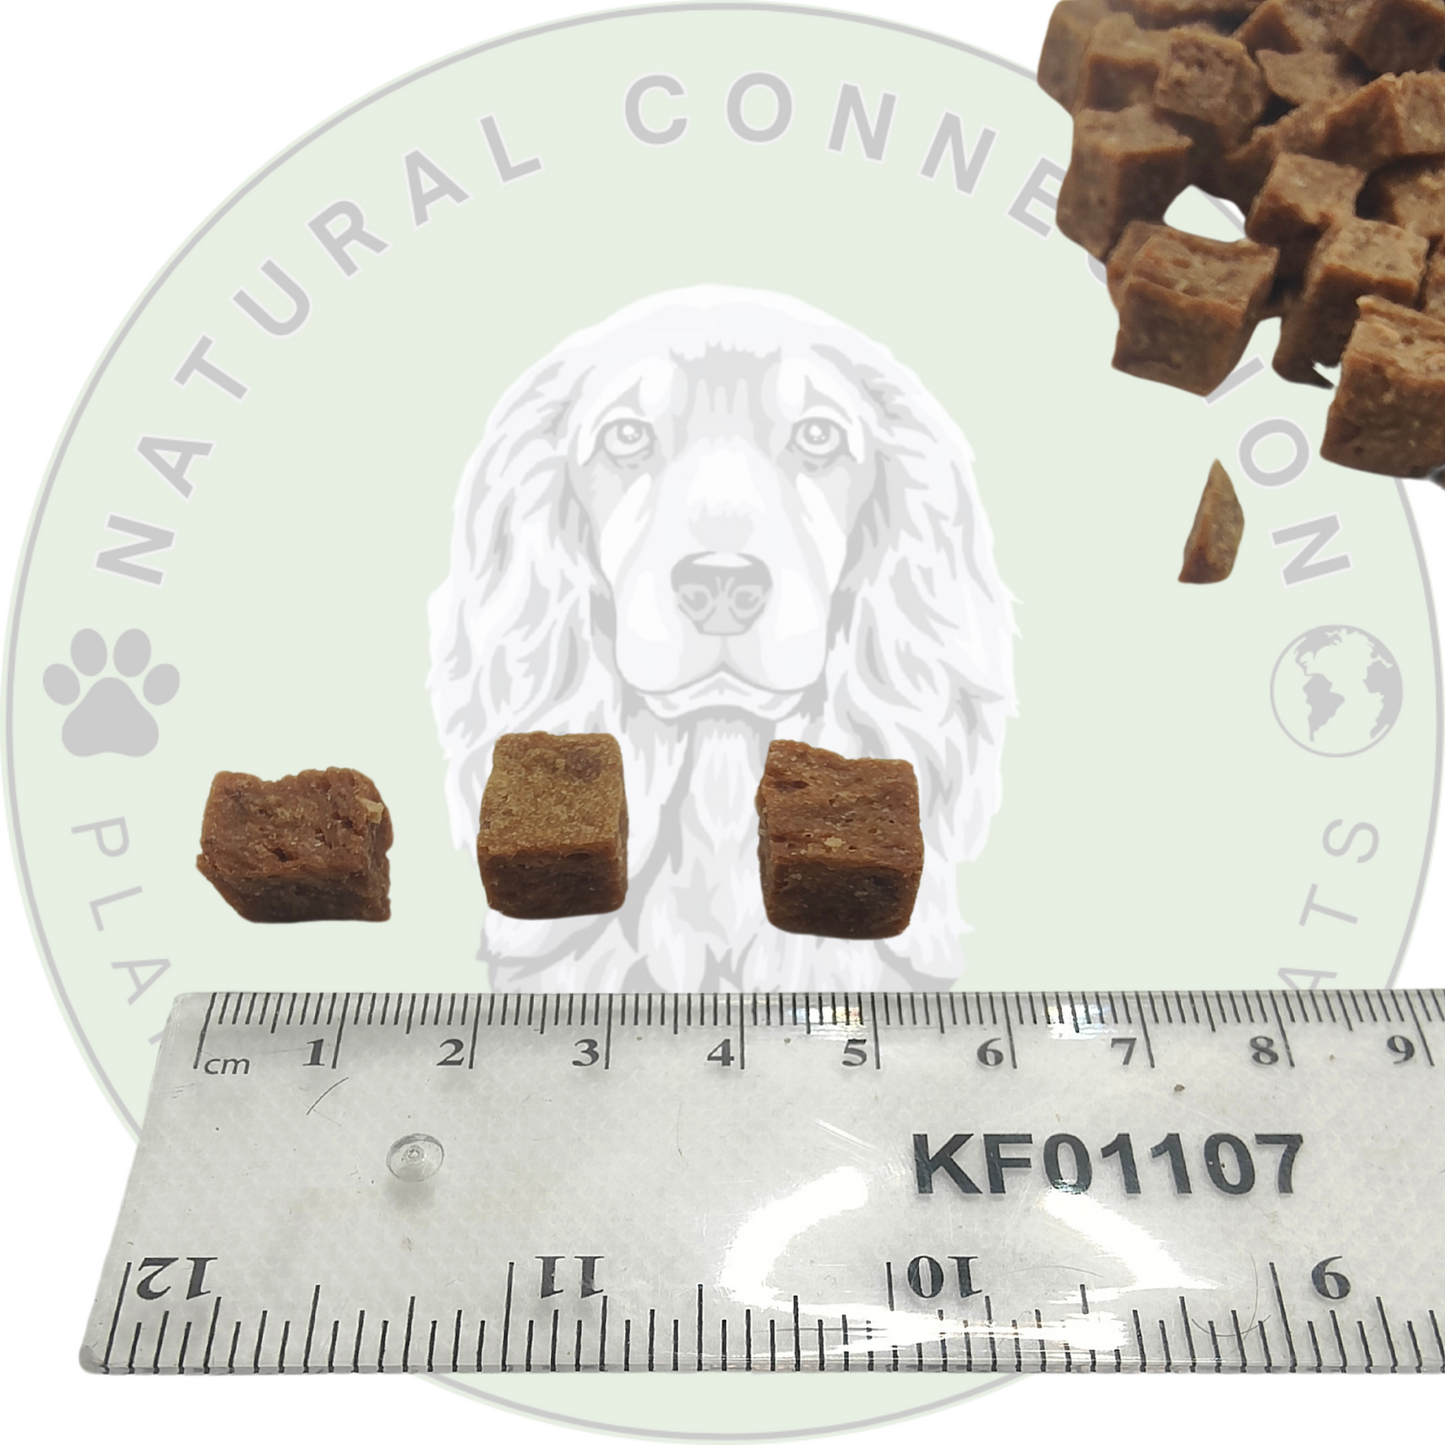 Horse Meat Trainer Bites | Bitesize Crunchy Meaty Dog Treats by Natural Connection